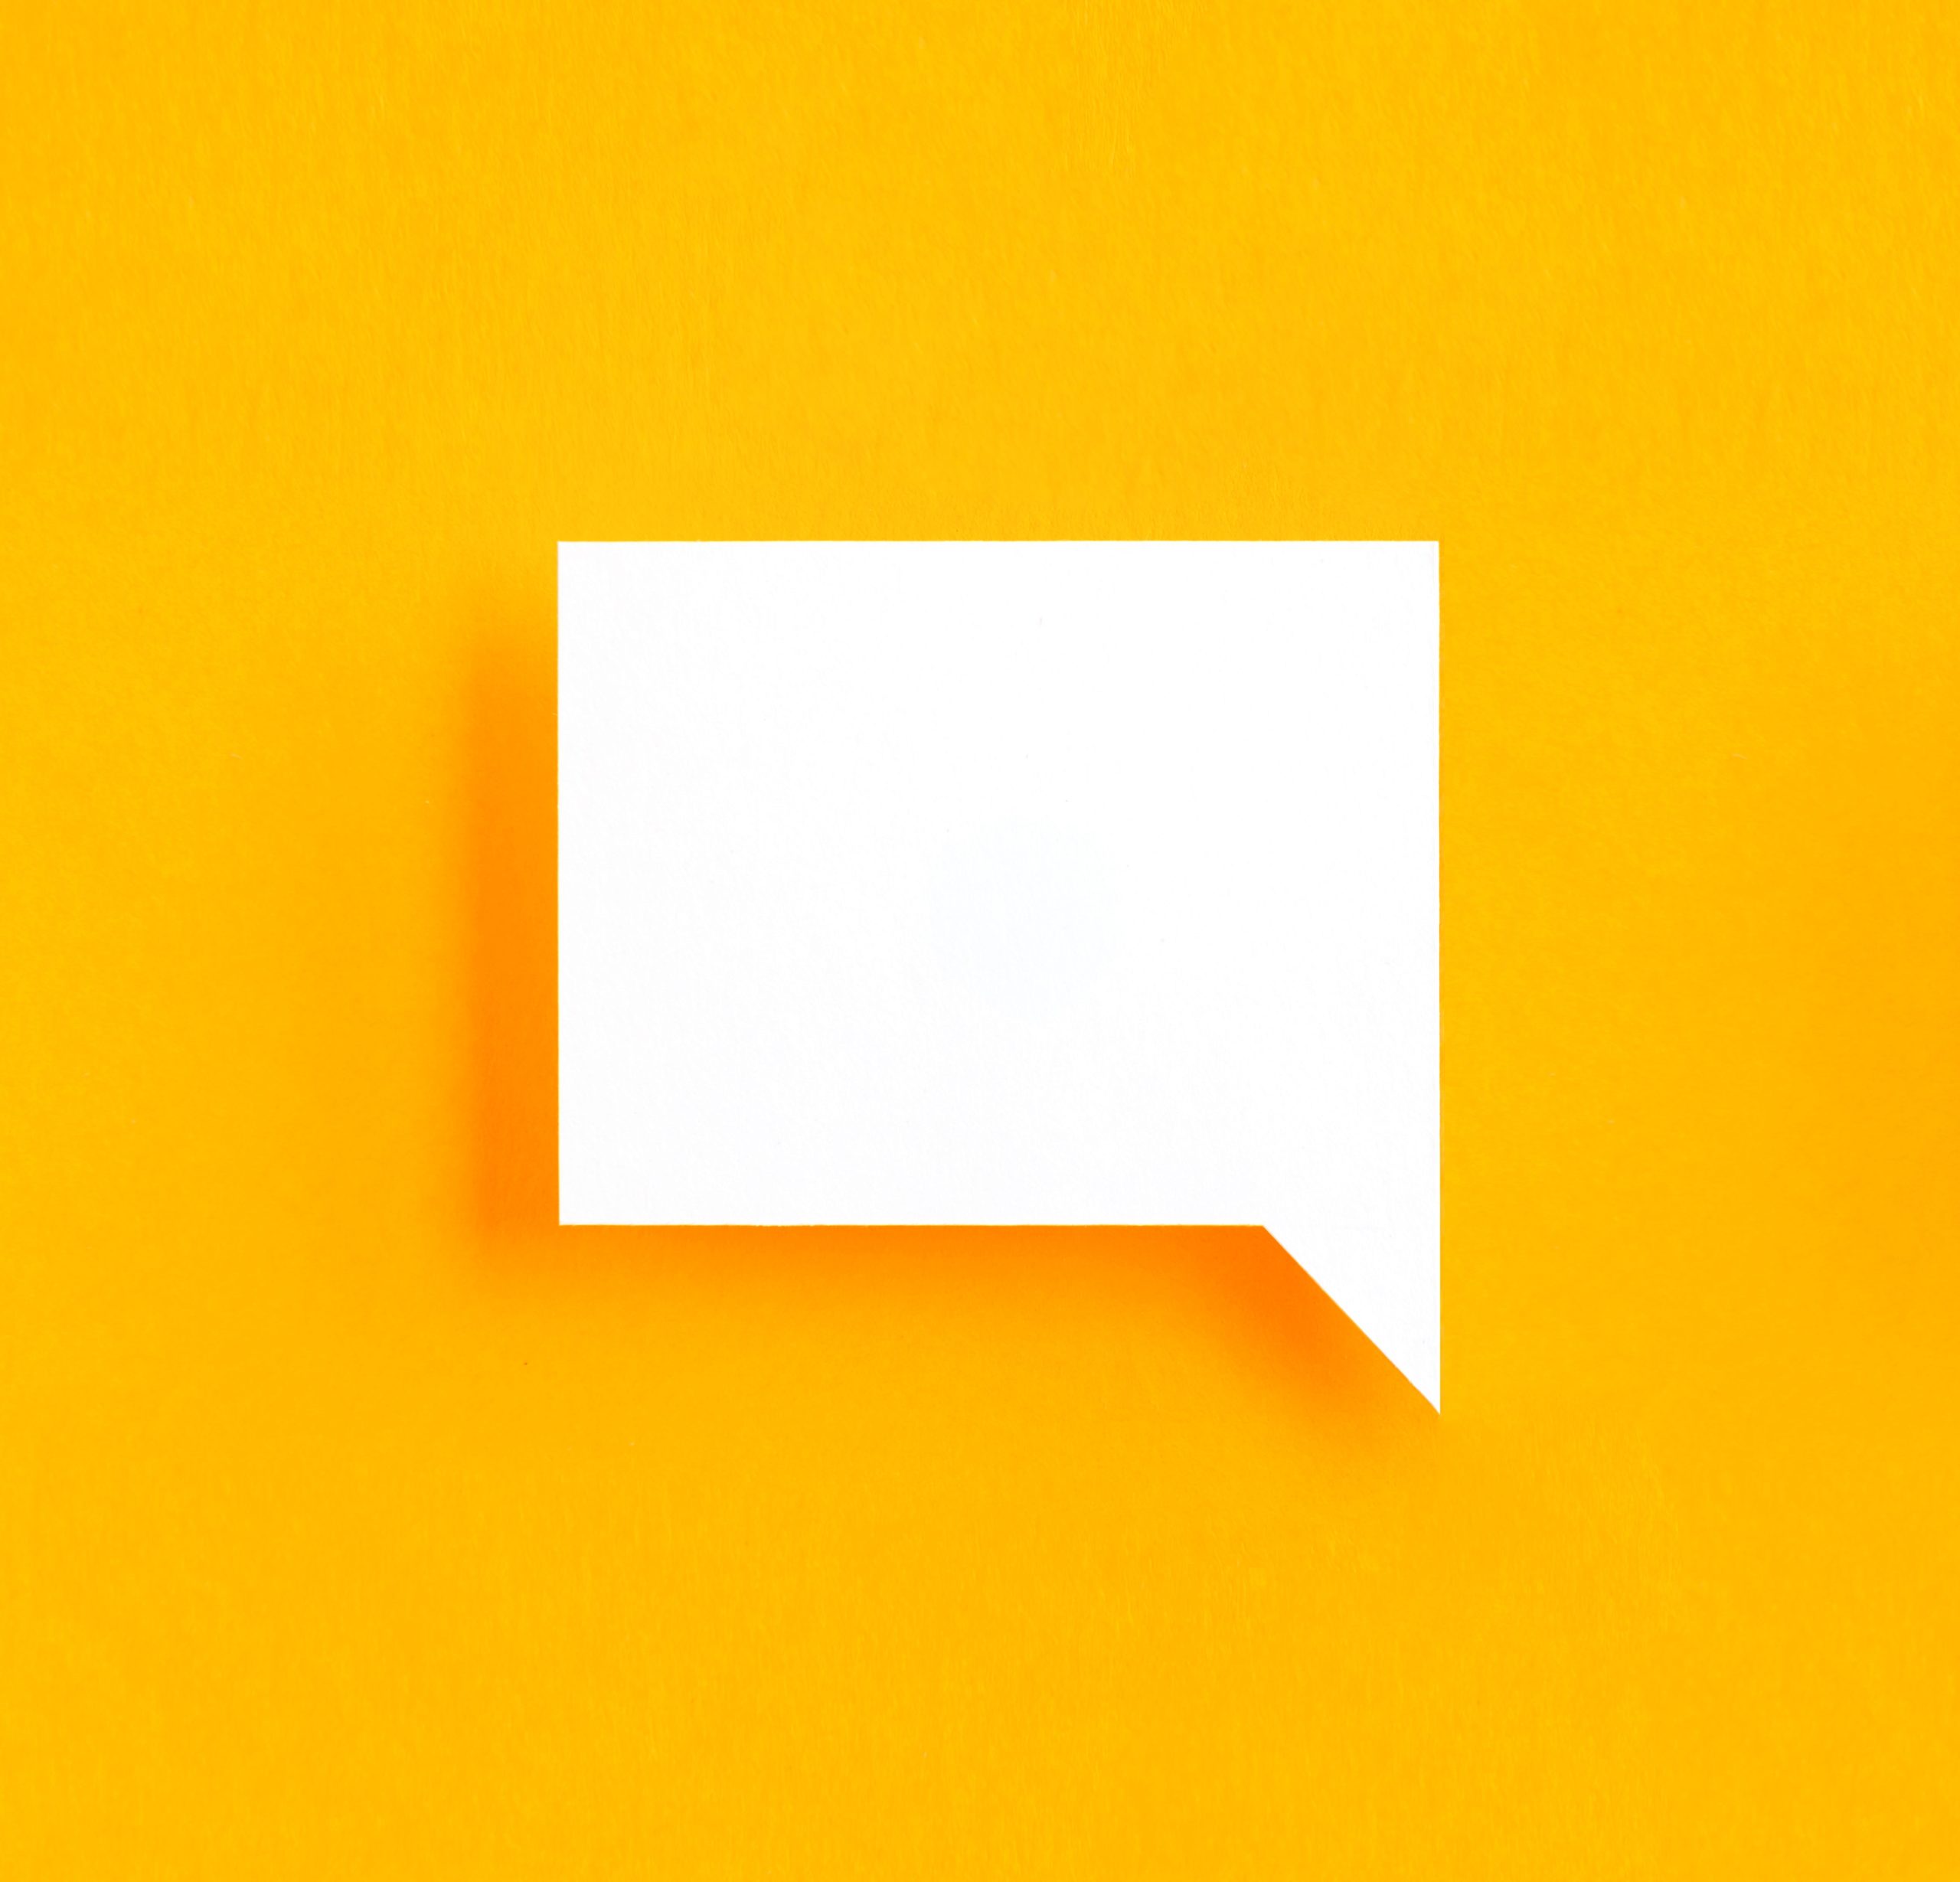 white square speech bubble on yellow background